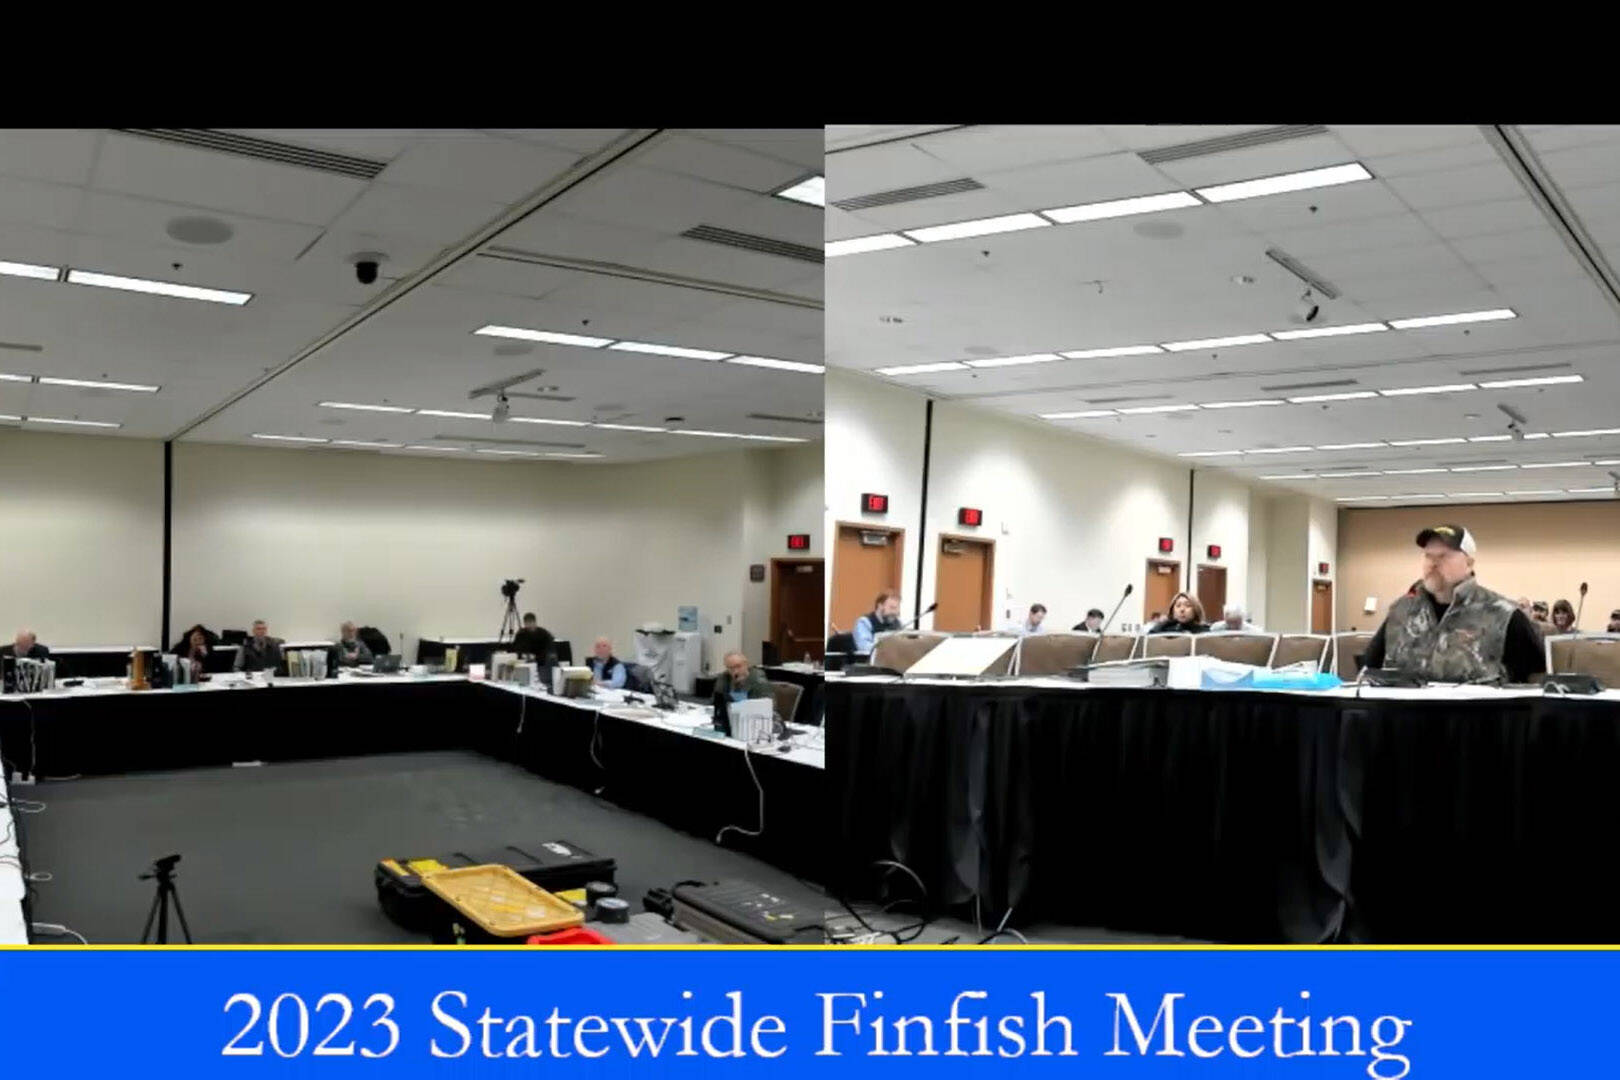 Glen Trombley, a Kenai River personal use guide, testifies to the Alaska Board of Fisheries during the 2023 Statewide Finfish Meeting on March 10, 2023 at the Egan Civic & Convention Center in Anchorage Alaska. (Screenshot)